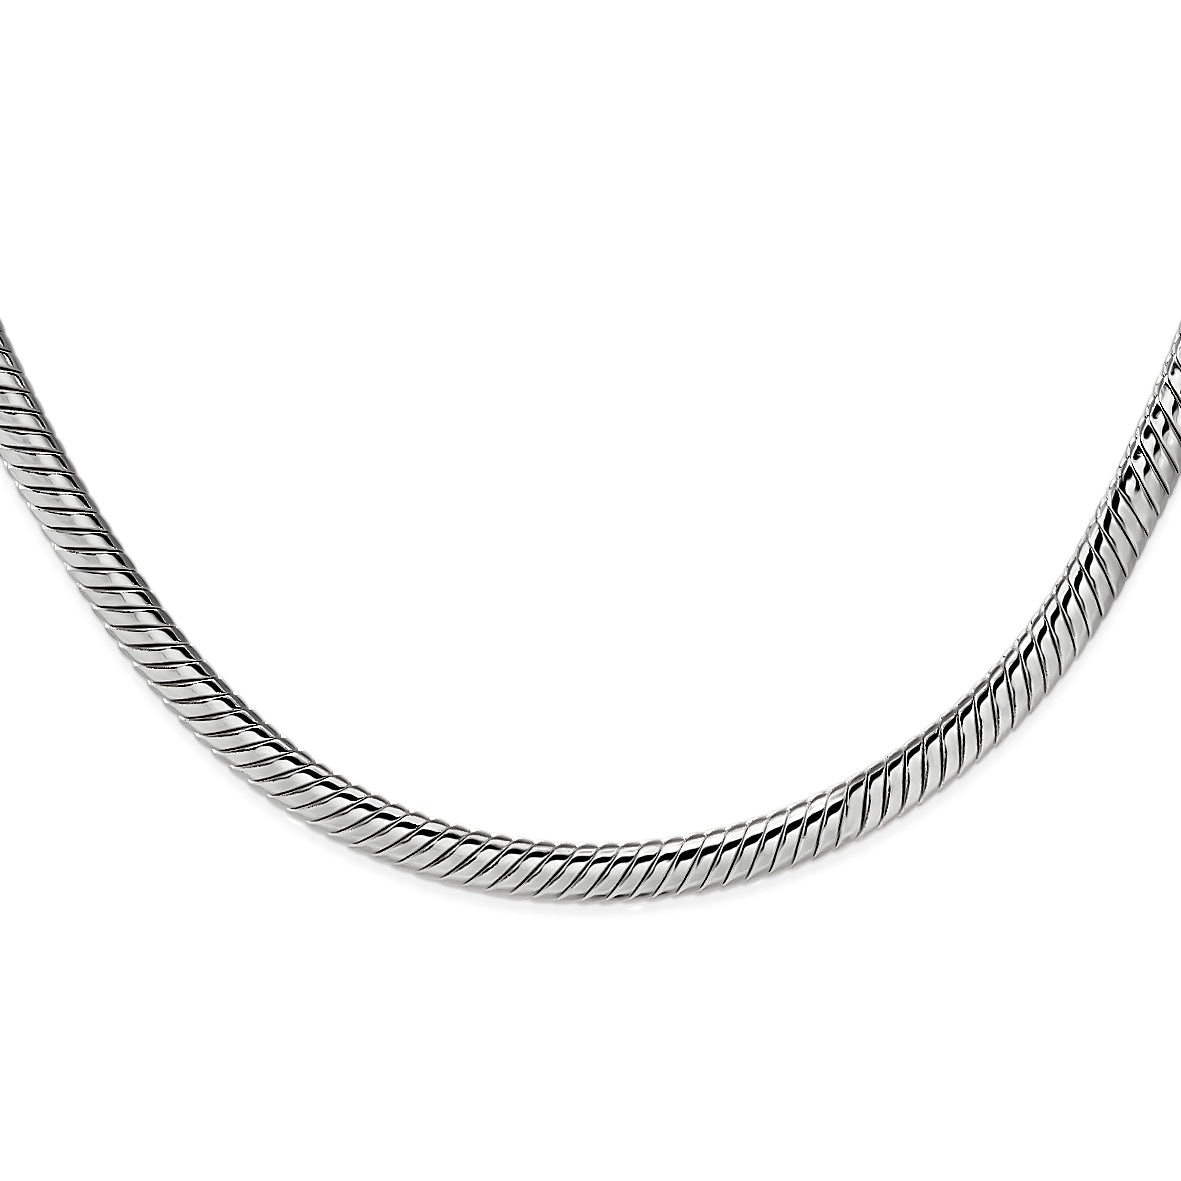 Sterling silver thick snake chain